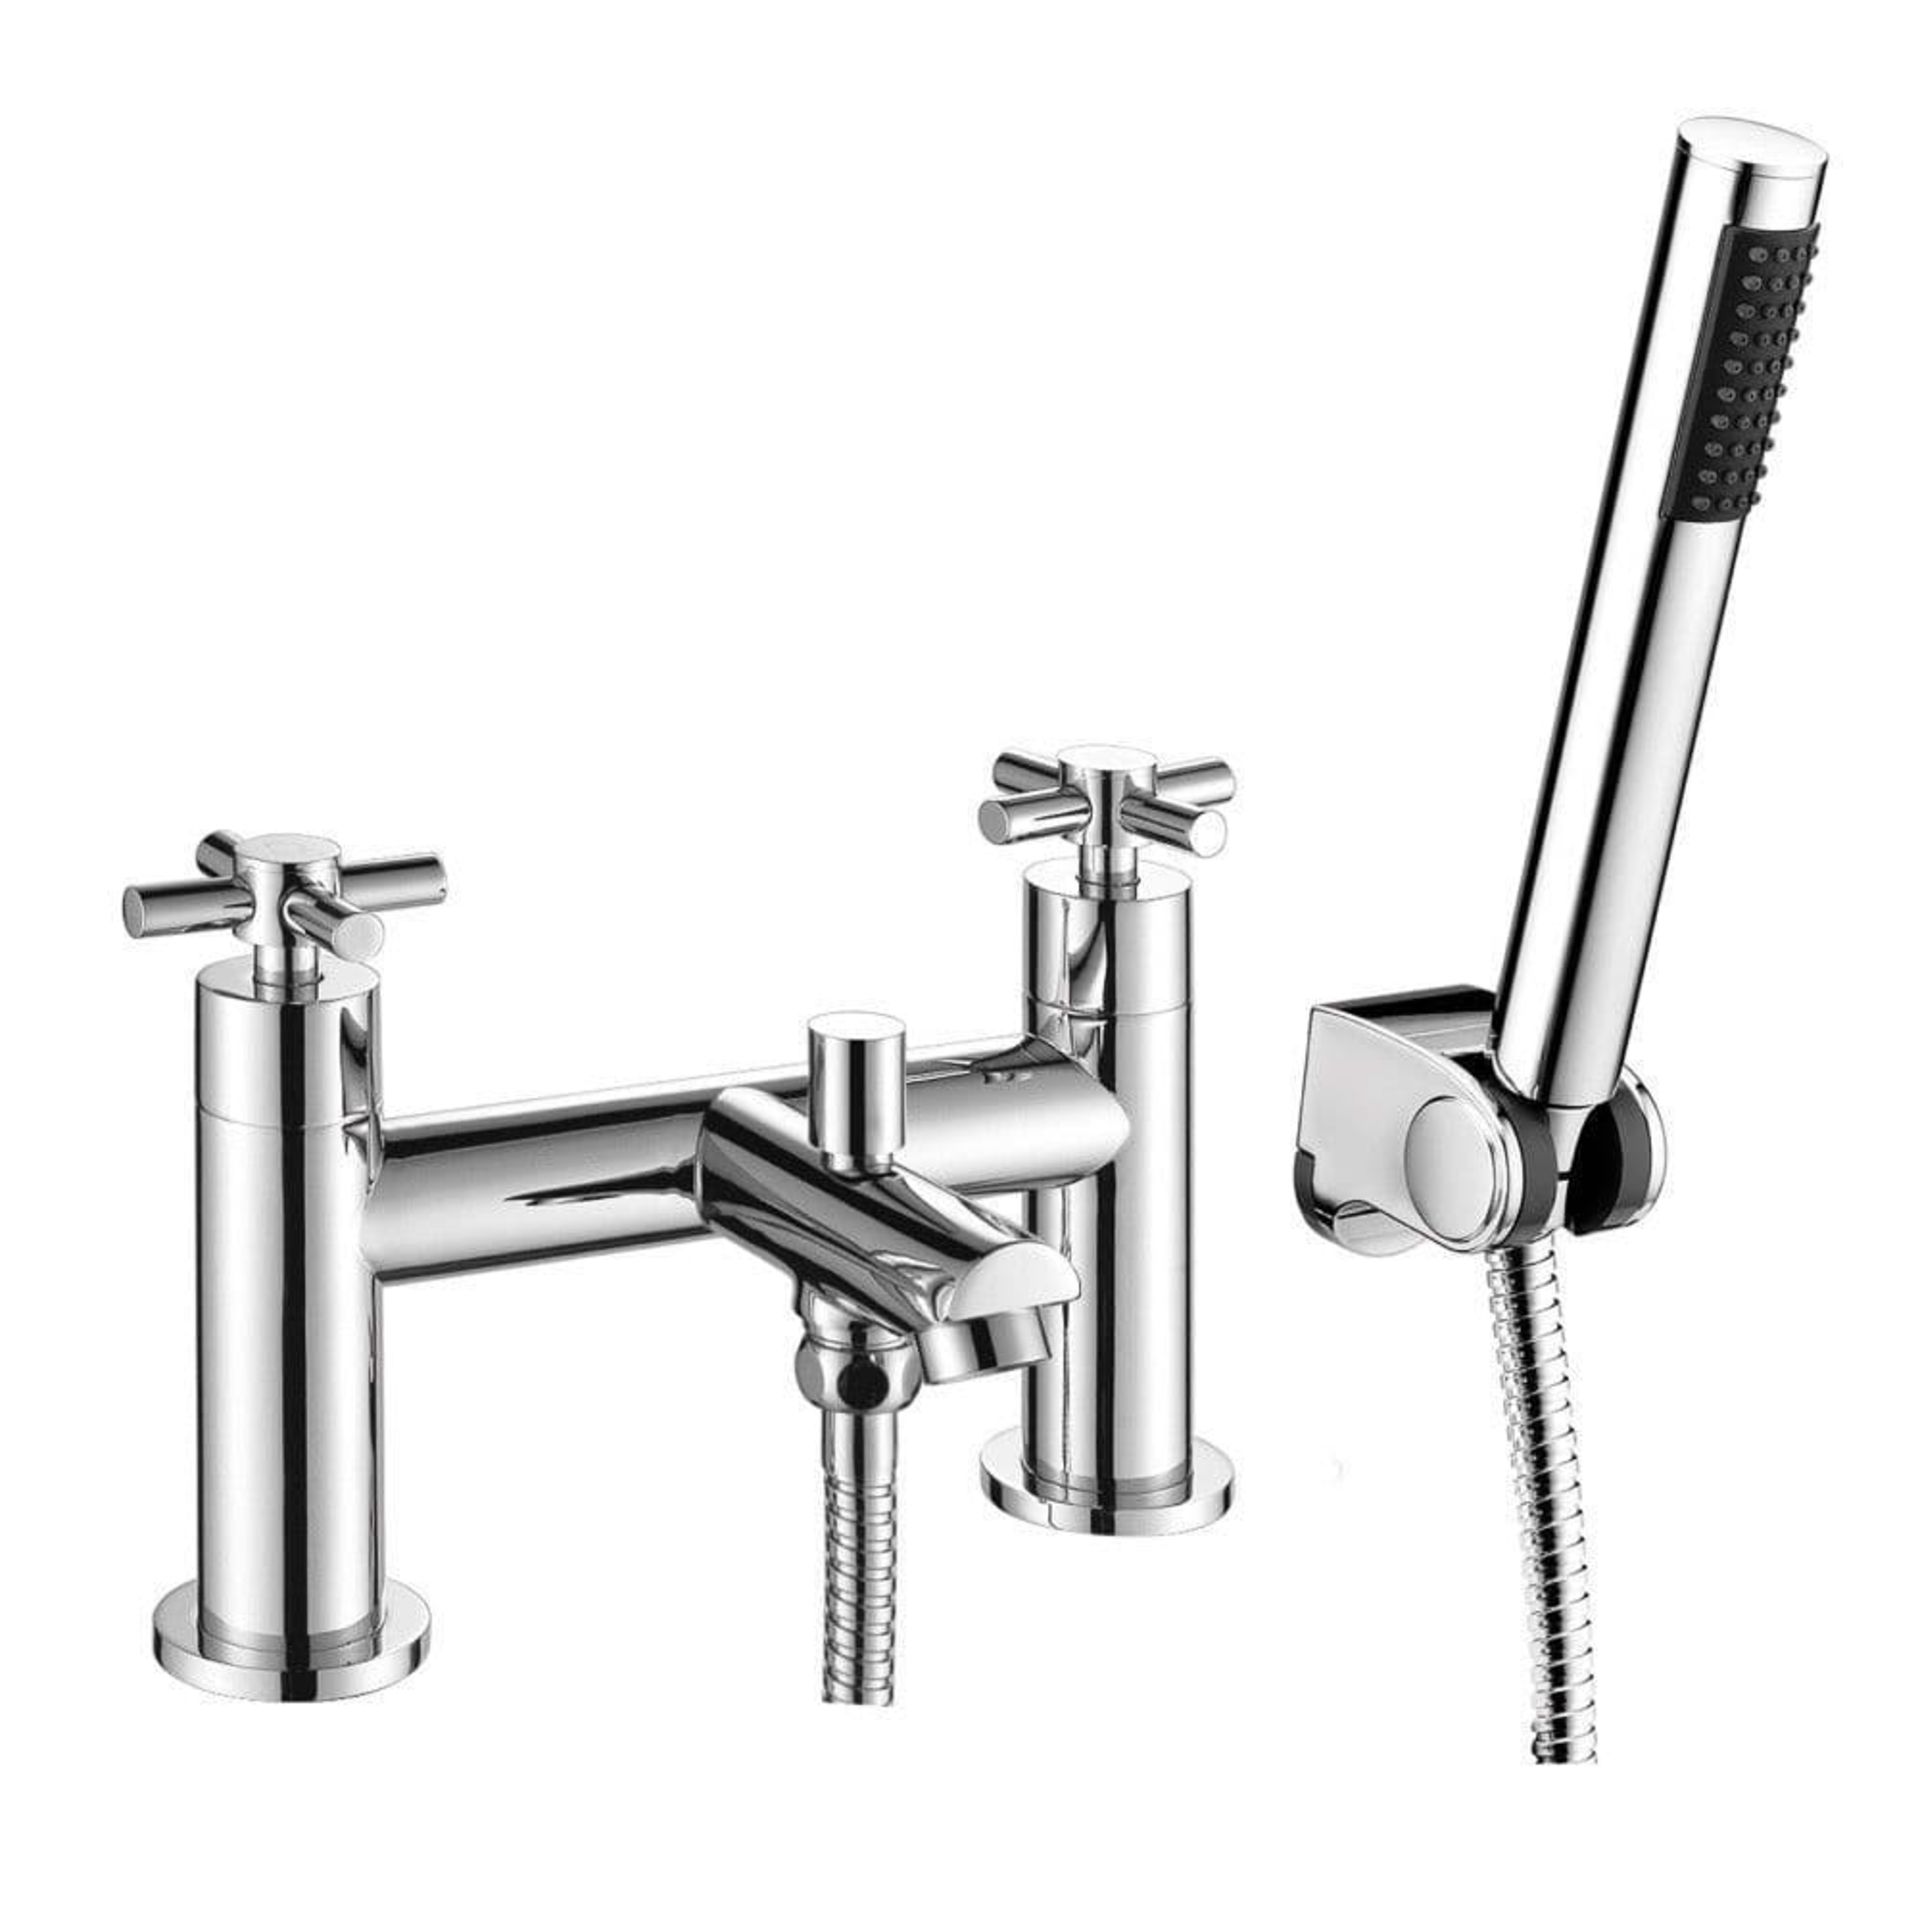 New (T91) Acel Chrome Bath Shower Mixer & Shower Kit. RRP £304.99. Classic Styling With A Cont...